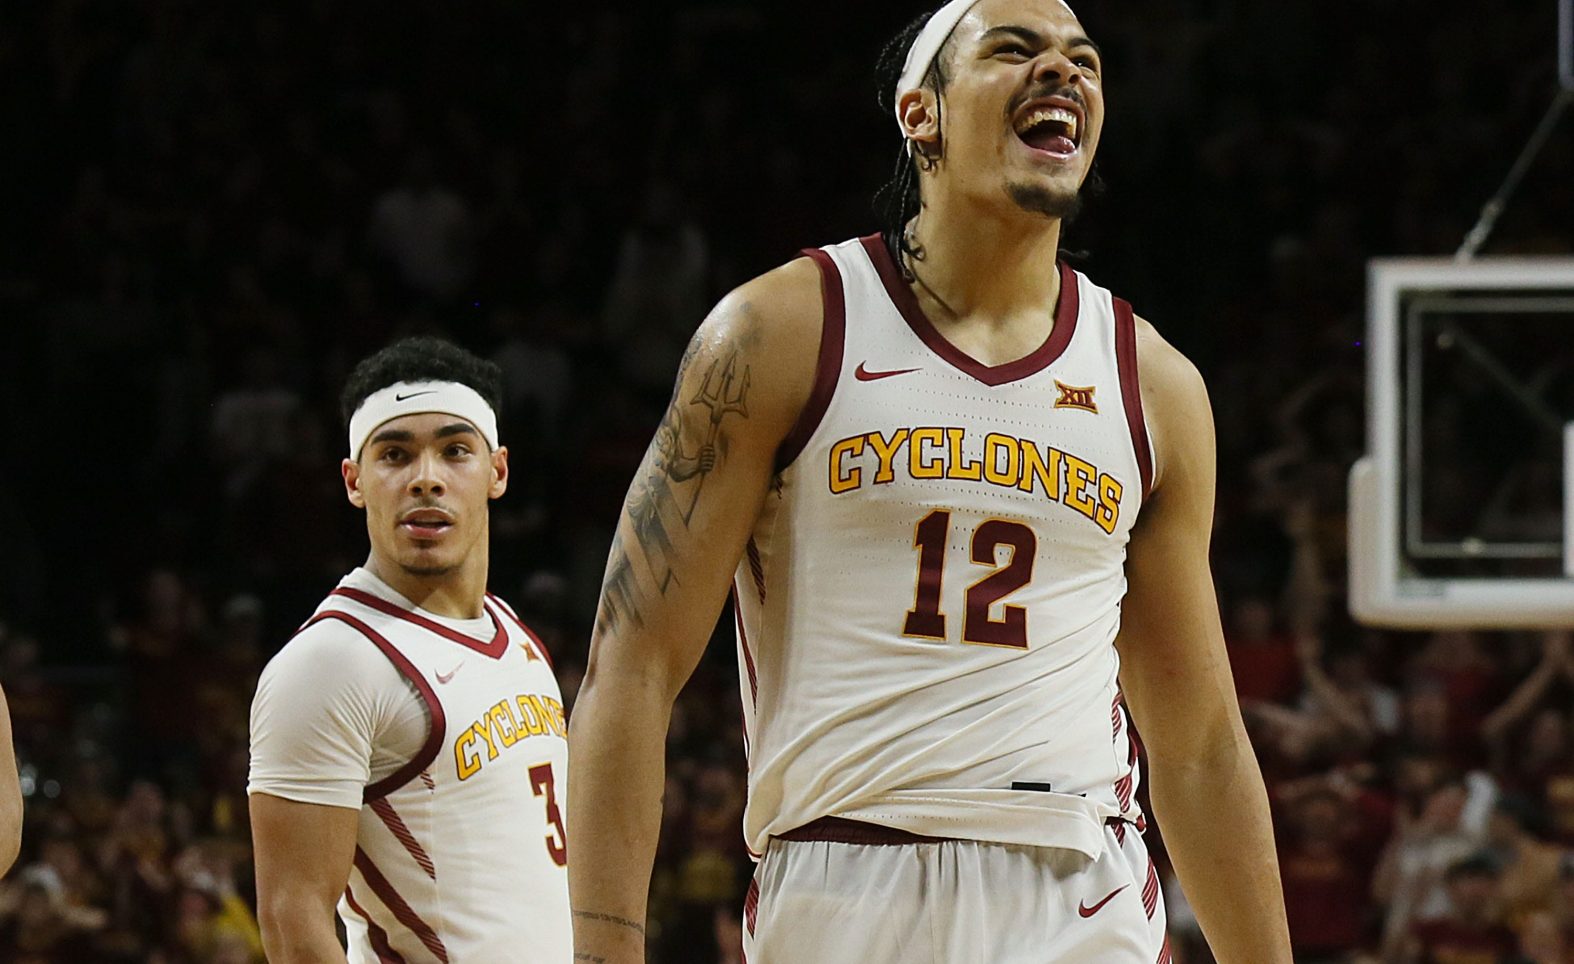 Two Guys Named Chris: Iowa State goes unbeaten in Hilton, weekend hoops preview